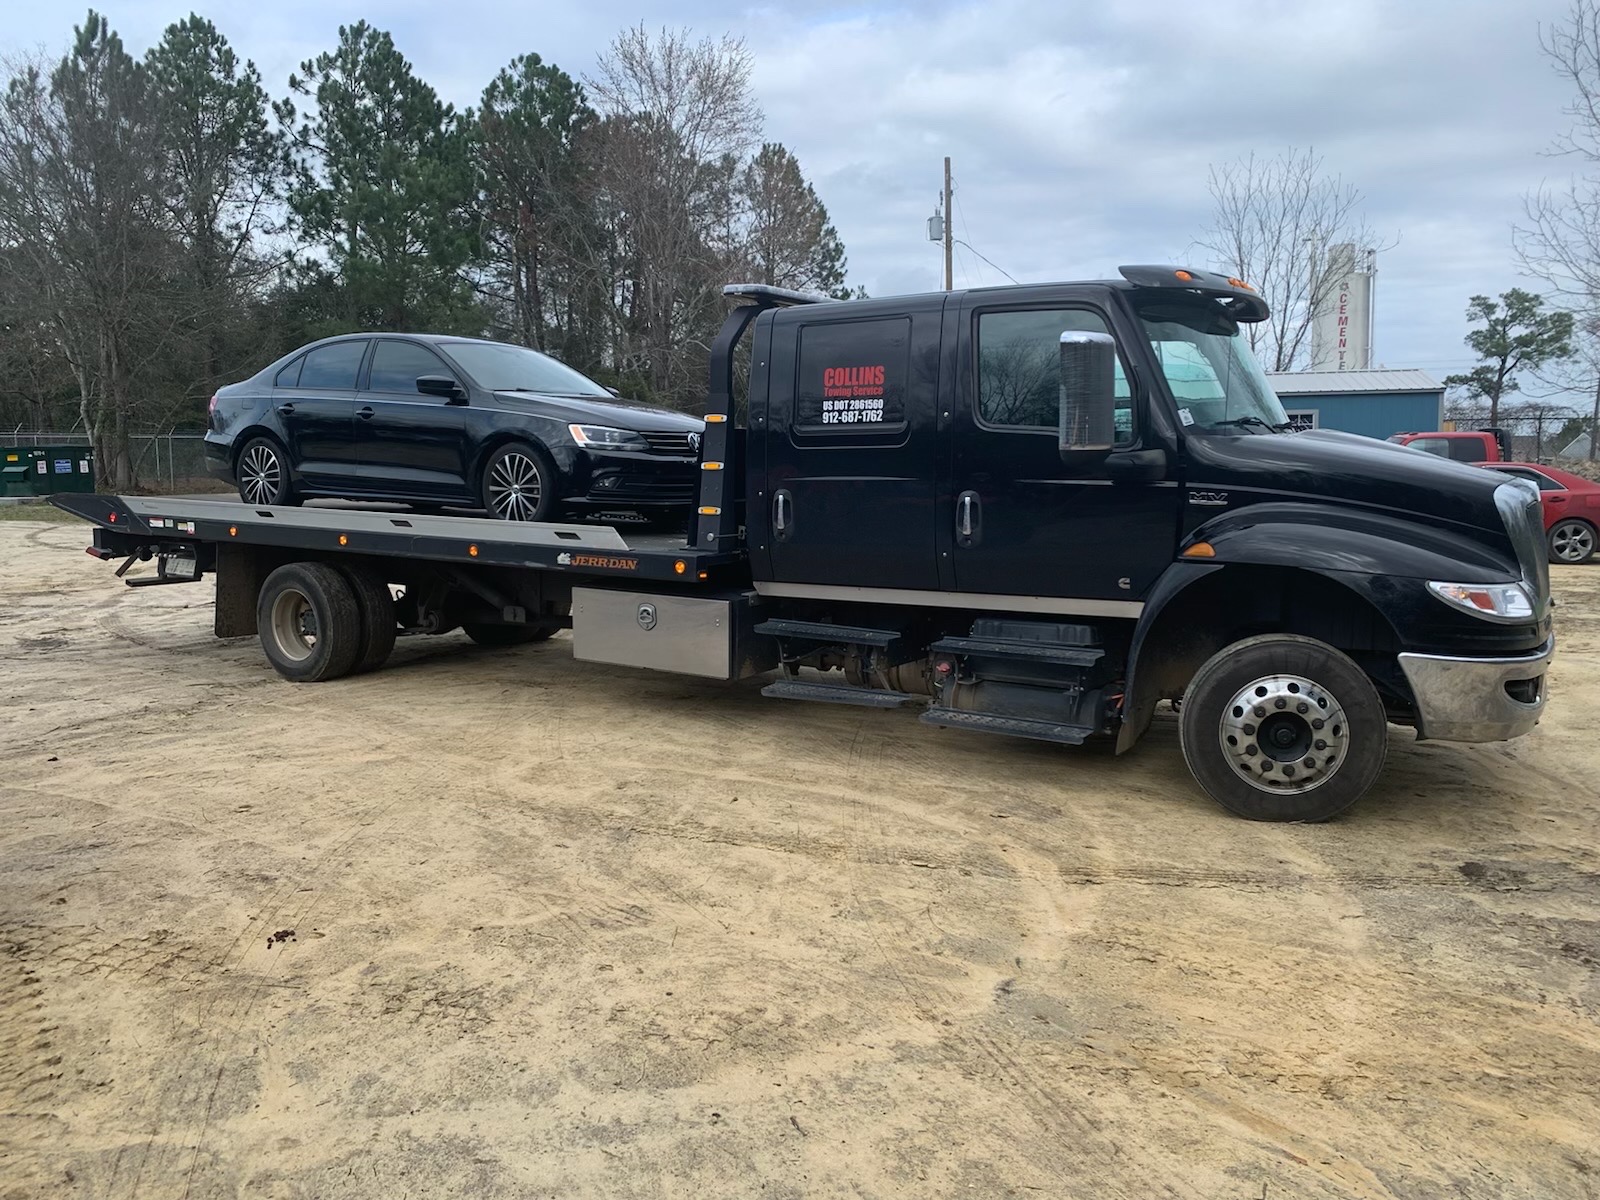 Statesboro Towing Service | Repo Service | Collins Towing and Recovery